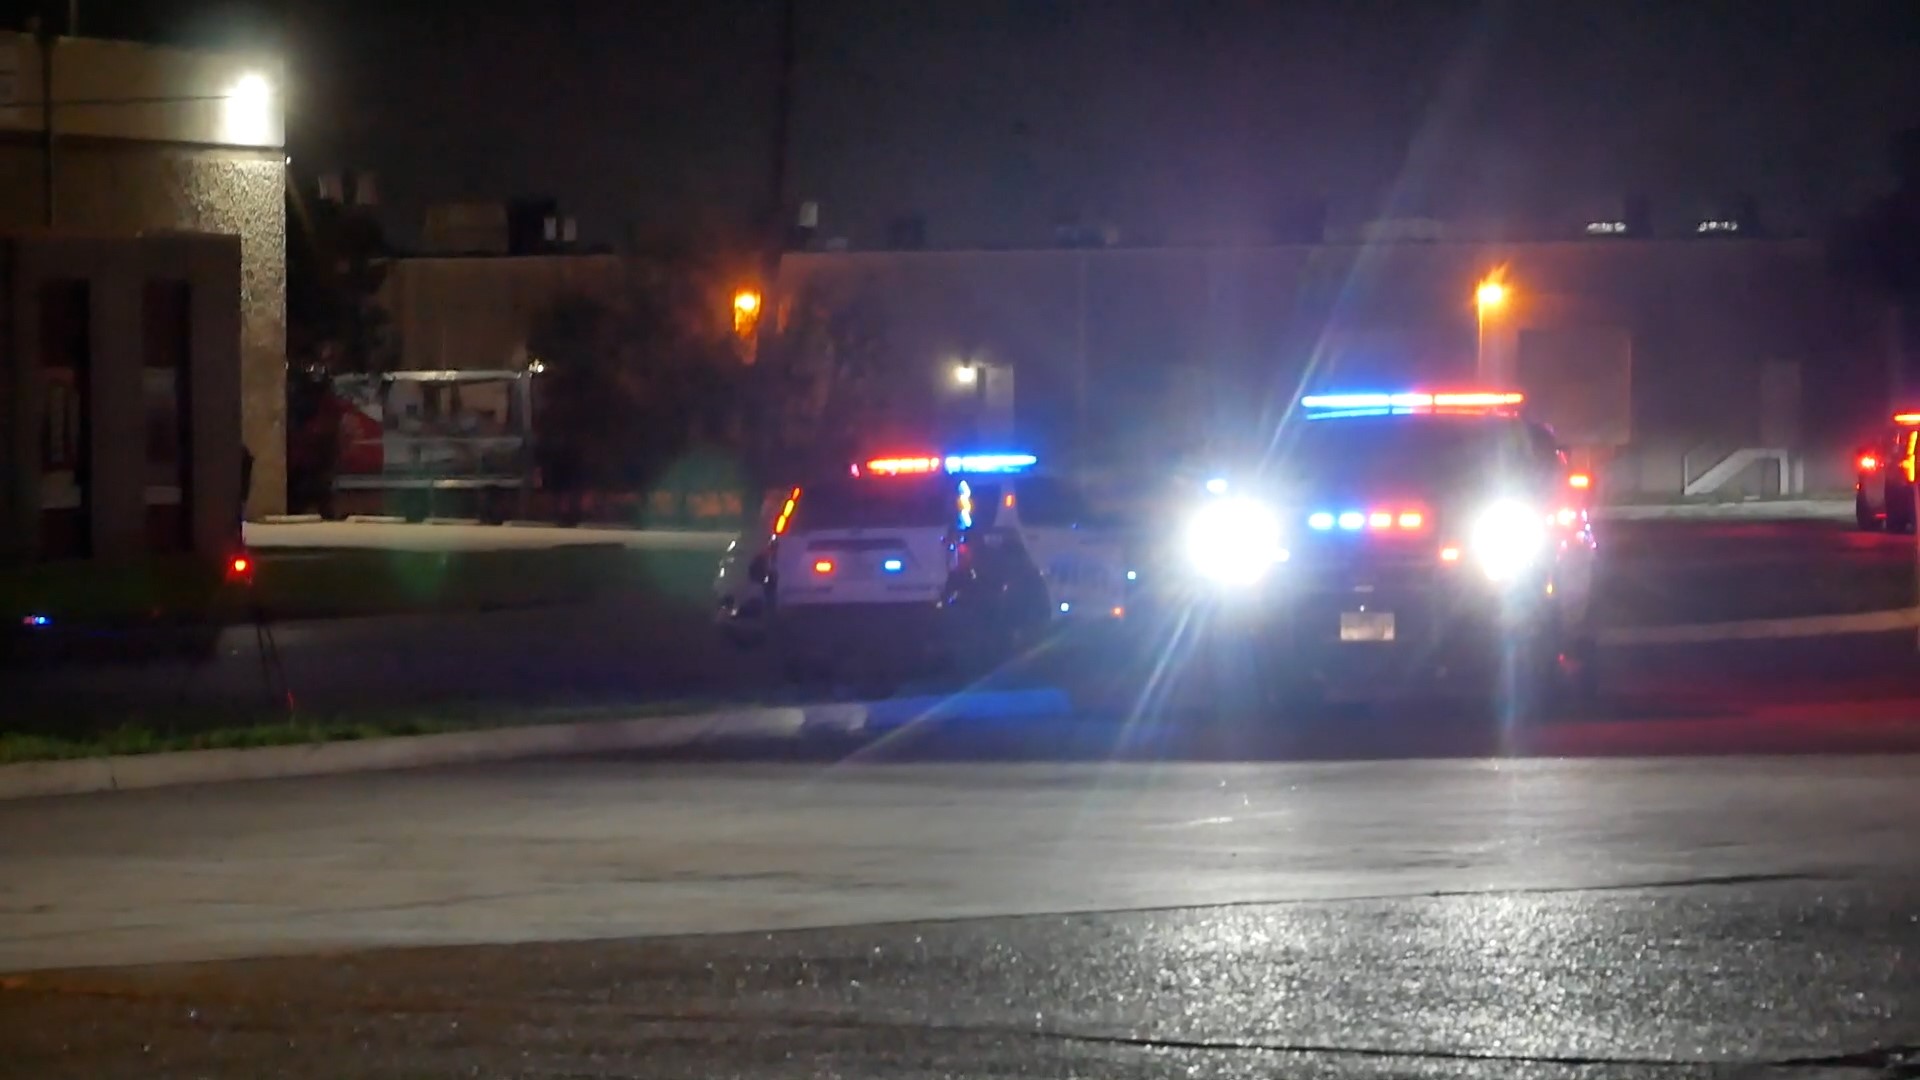 Dallas police said the preliminary investigation determined a man was walking in the the 11200 block of Petal Street when he was hit by a vehicle.